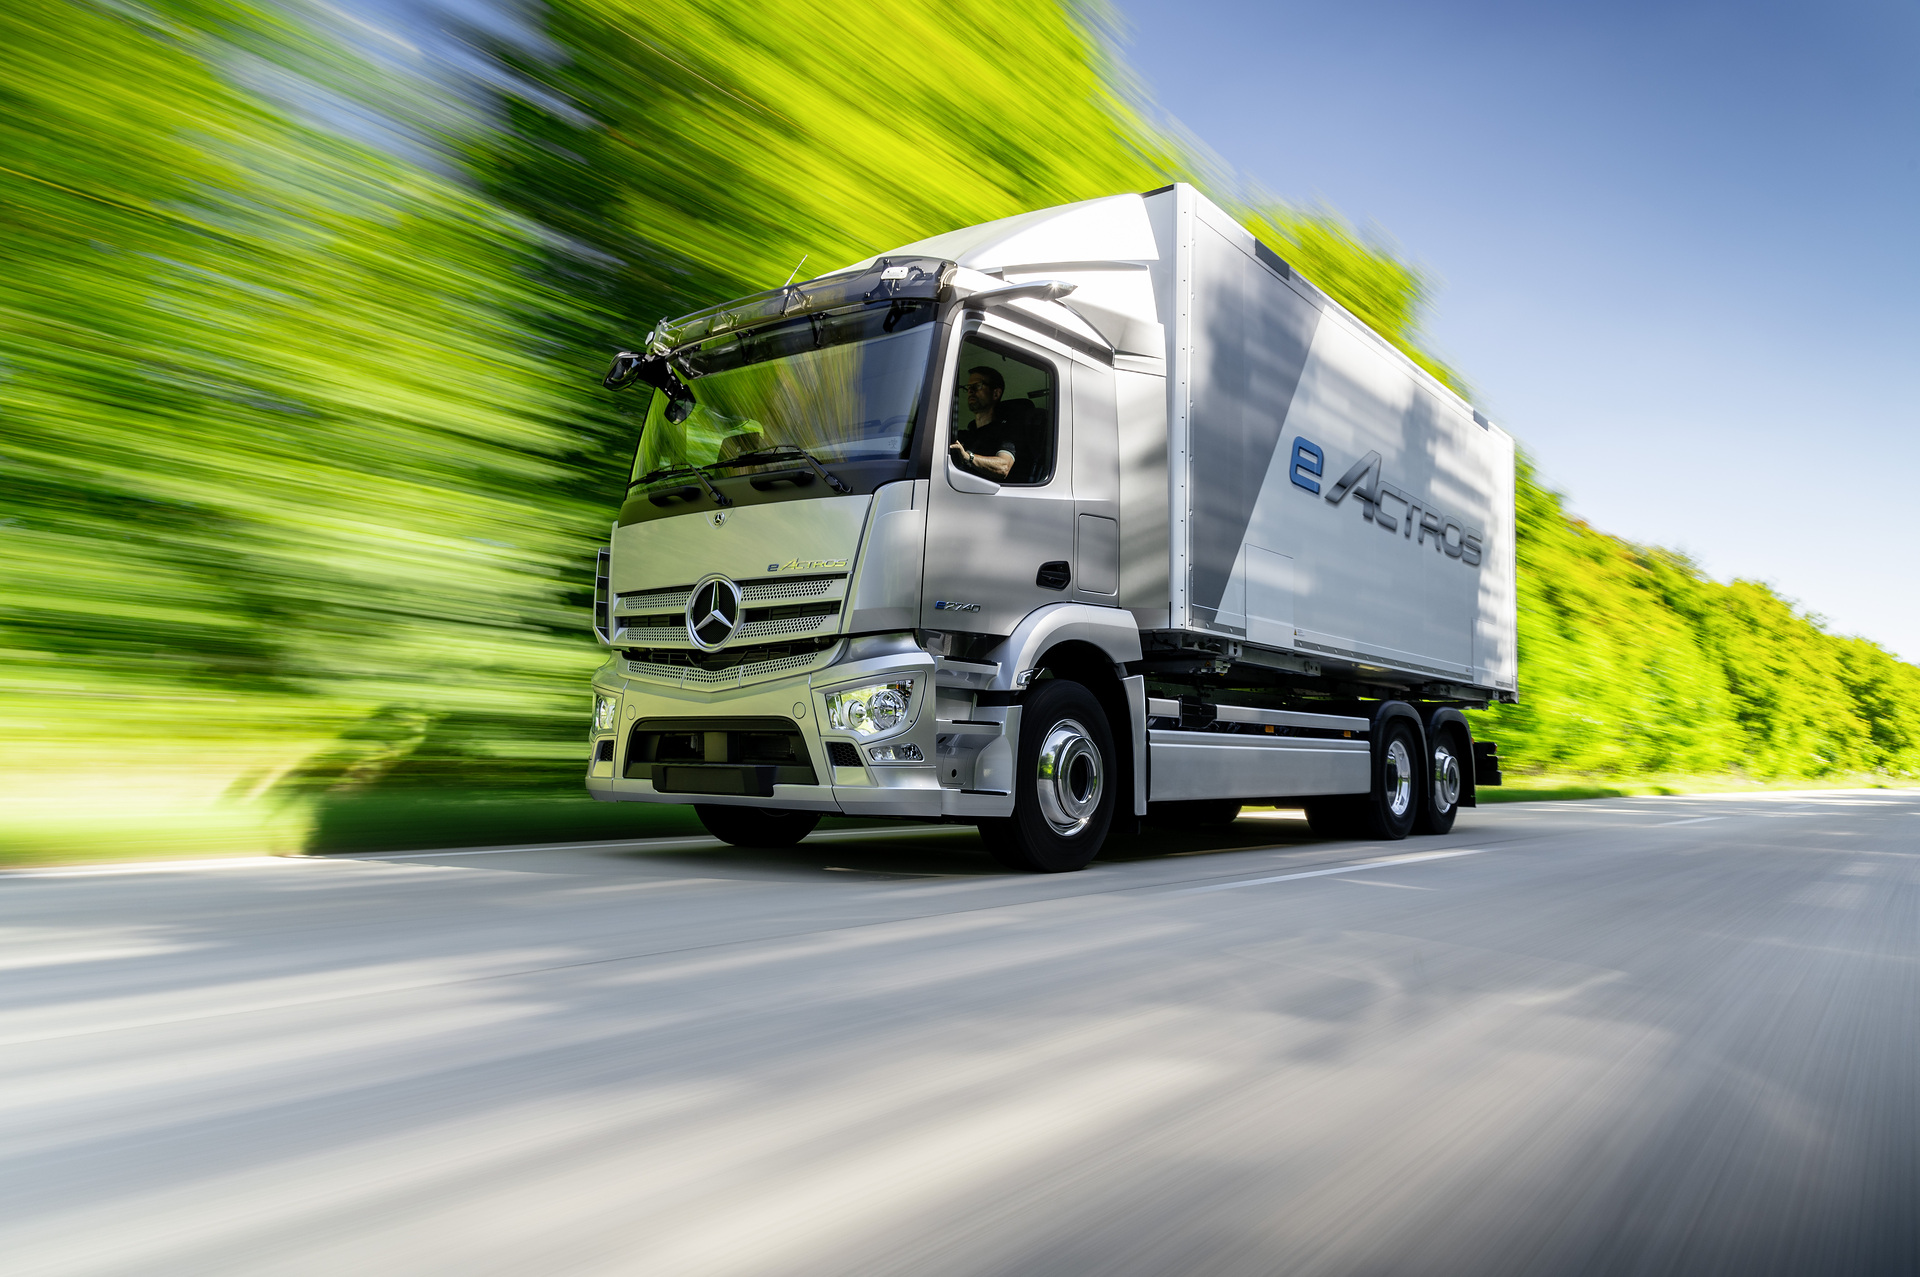 Mercedes-Benz Wörth plant to start series production of the eActros in 2021